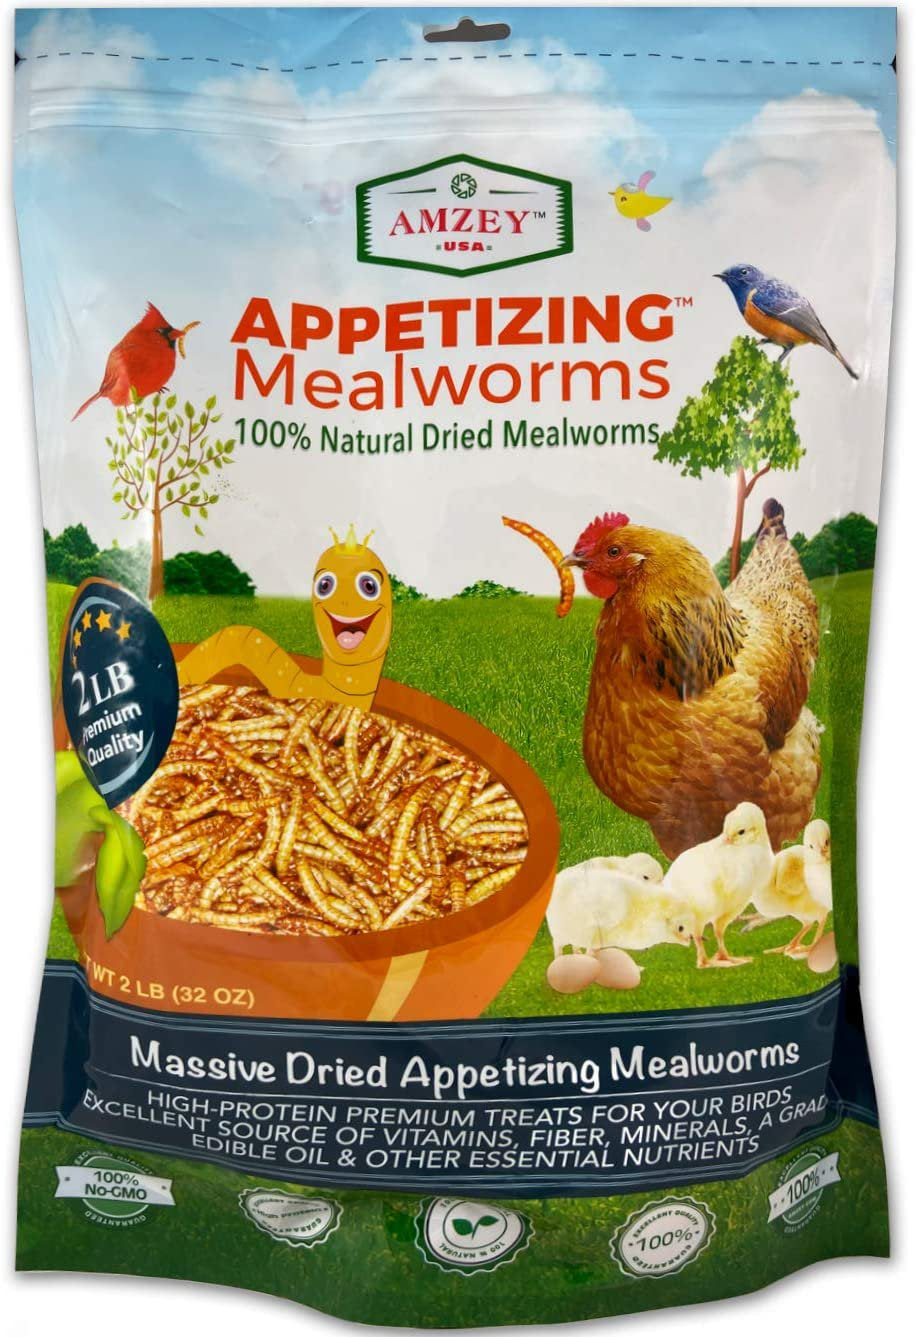 Amzey Freeze Dried Mealworms 2LBS, 100% Natural Non-Gmo, High-Protein Mealworms for Birds, Chicken Treats, Ducks, Wild Birds, Reptiles Animals & Pet Supplies > Pet Supplies > Bird Supplies > Bird Treats AMZEY 2 lbs  